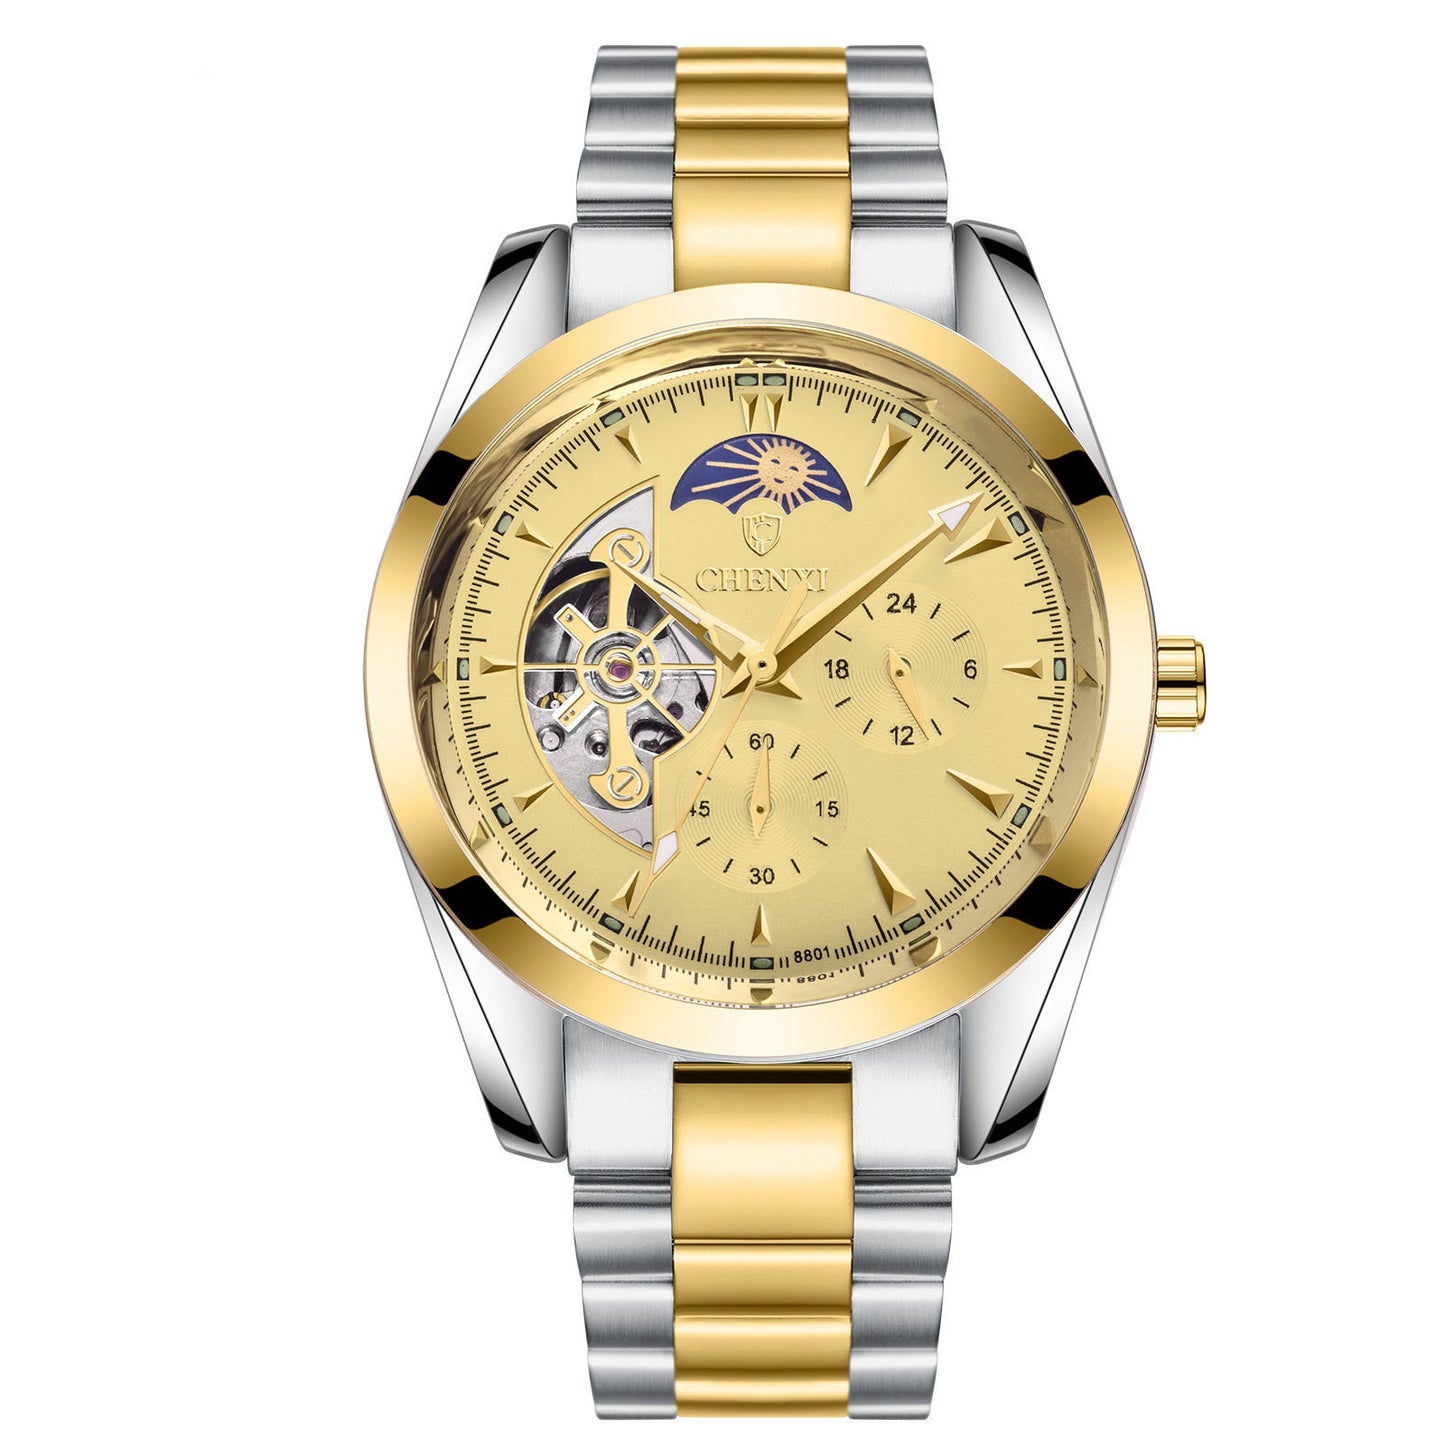 CHENXI CLASSIC MOON PHASE WATER RESISTAND BUISNESS WATCH